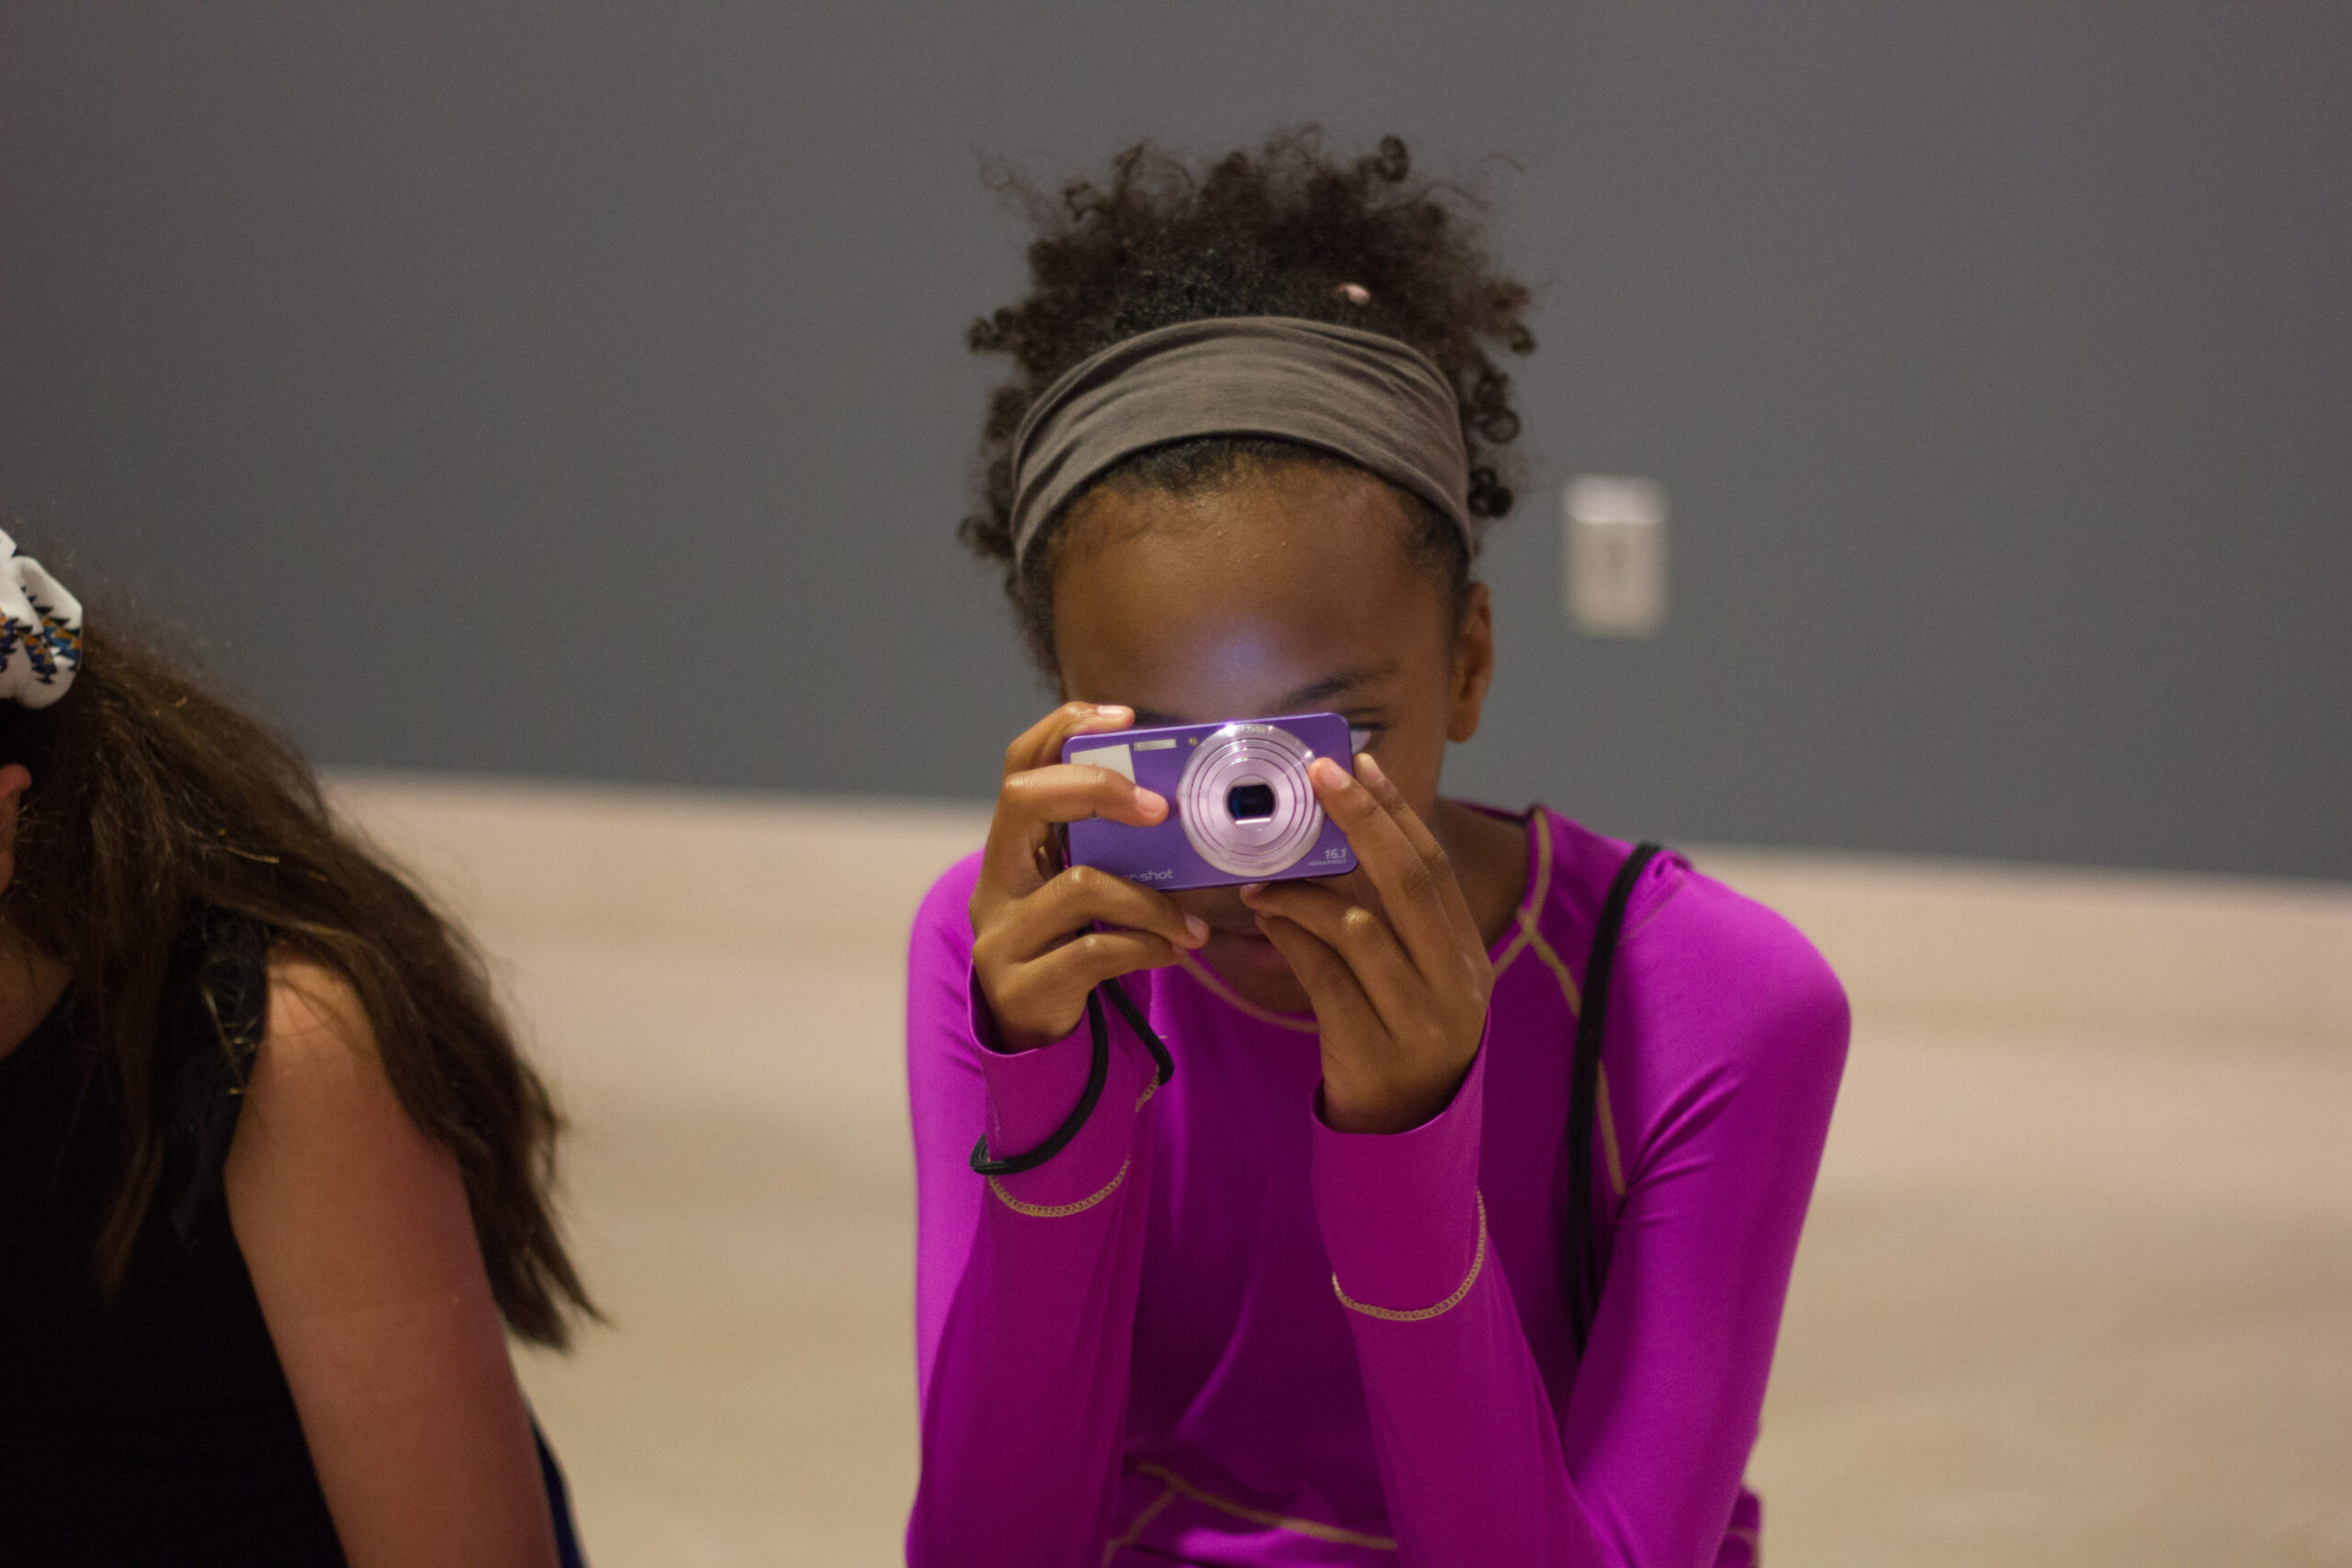 A child holding a purple camera up to her face while taking a photo.